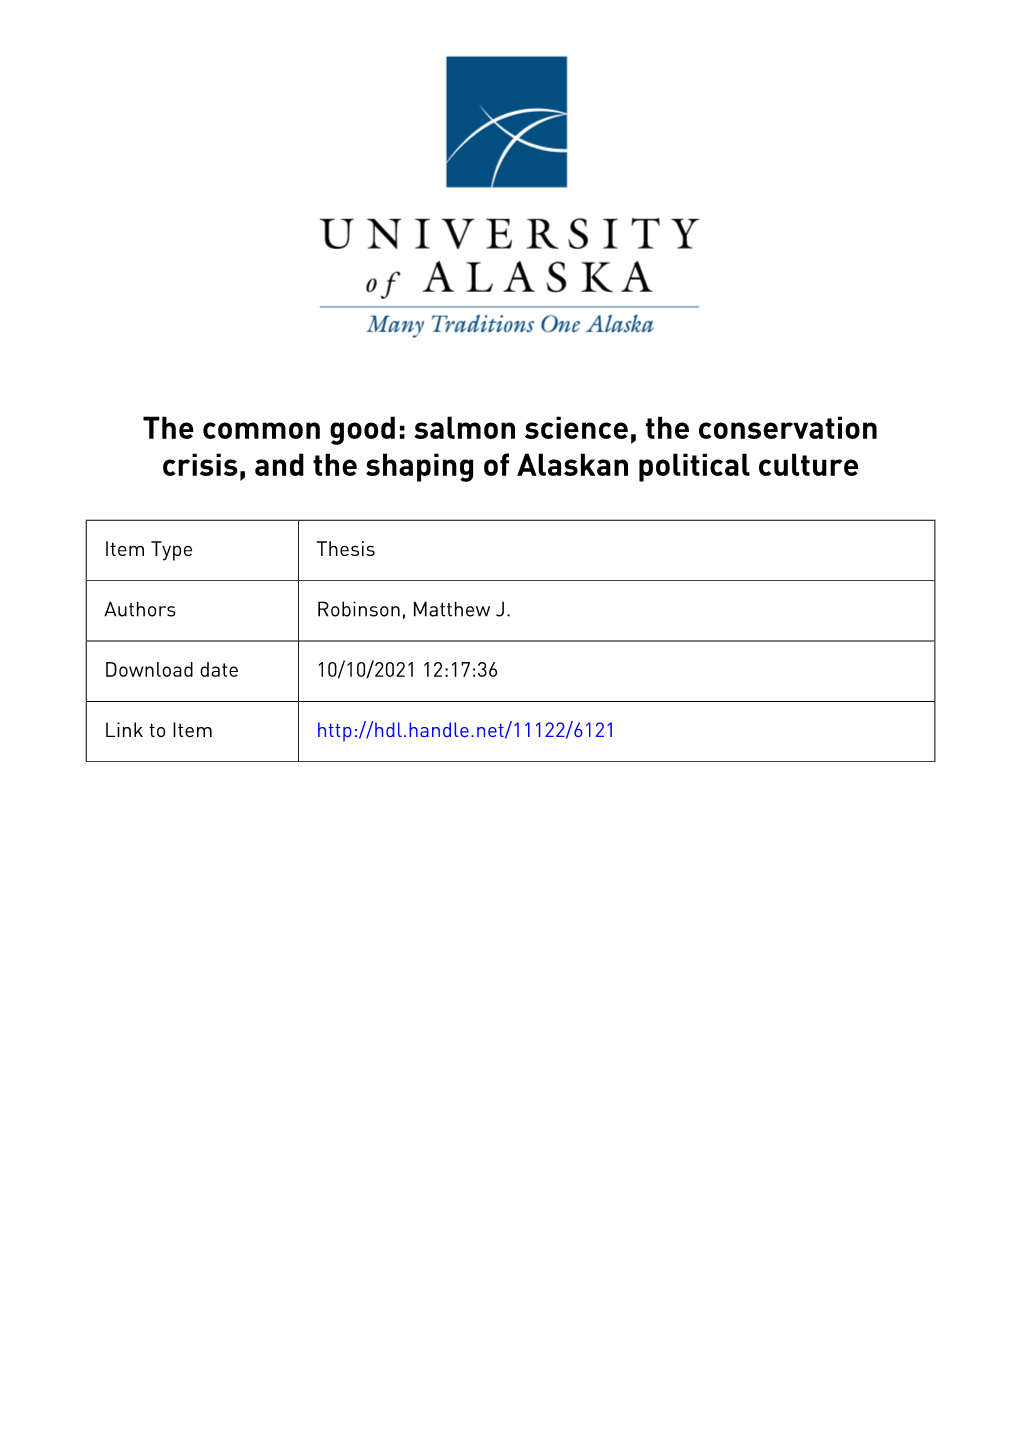 THE COMMON GOOD: SALMON SCIENCE, the CONSERVATION CRISIS, and the SHAPING of ALASKAN POLITICAL CULTURE by Matthew J. Robinson RE